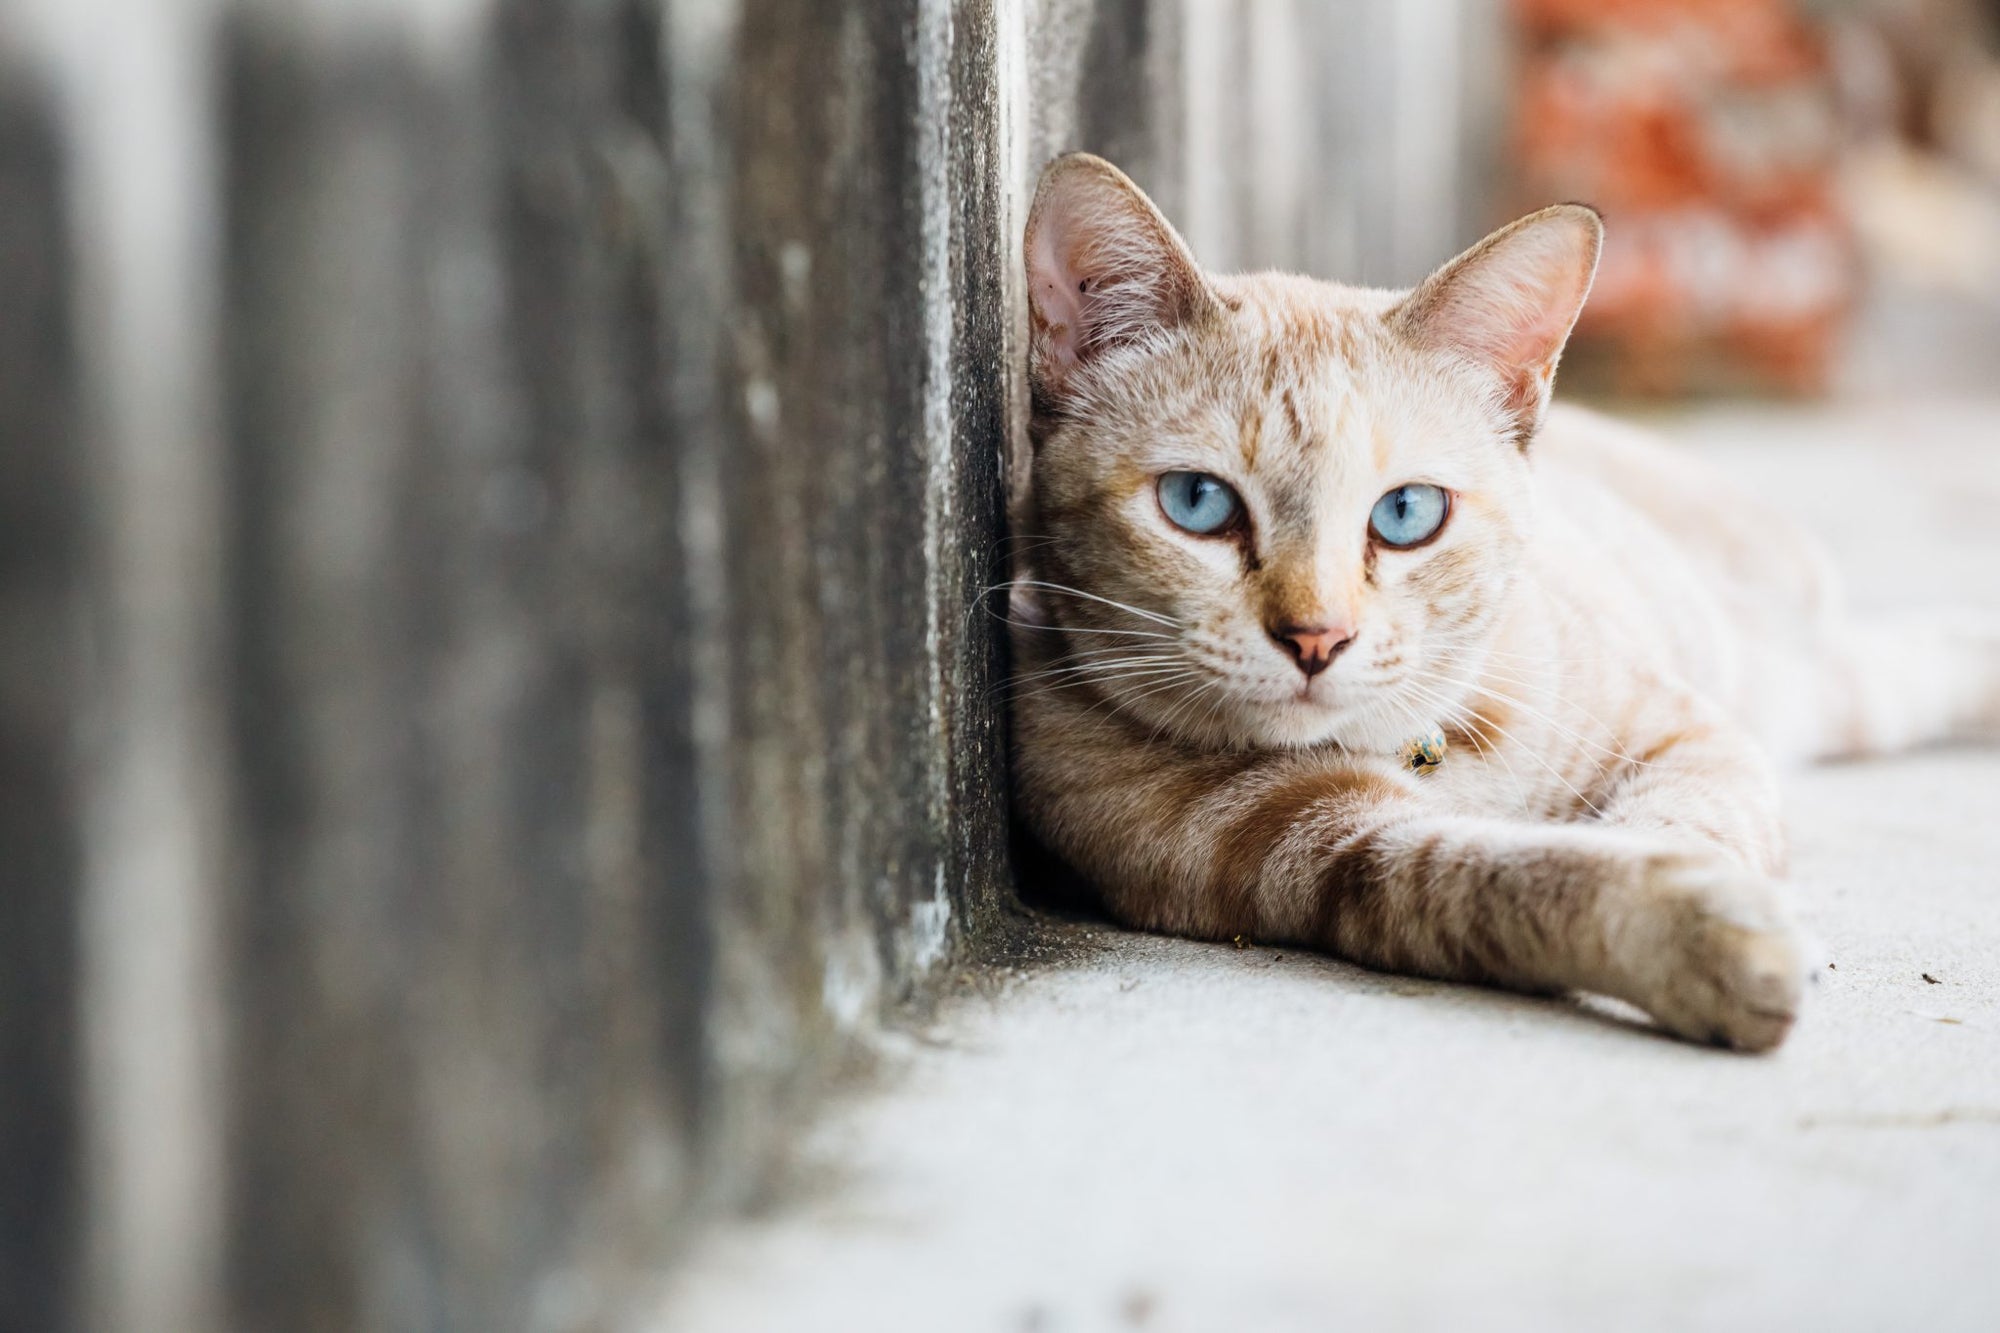 How to Safely Approach a Stray Cat